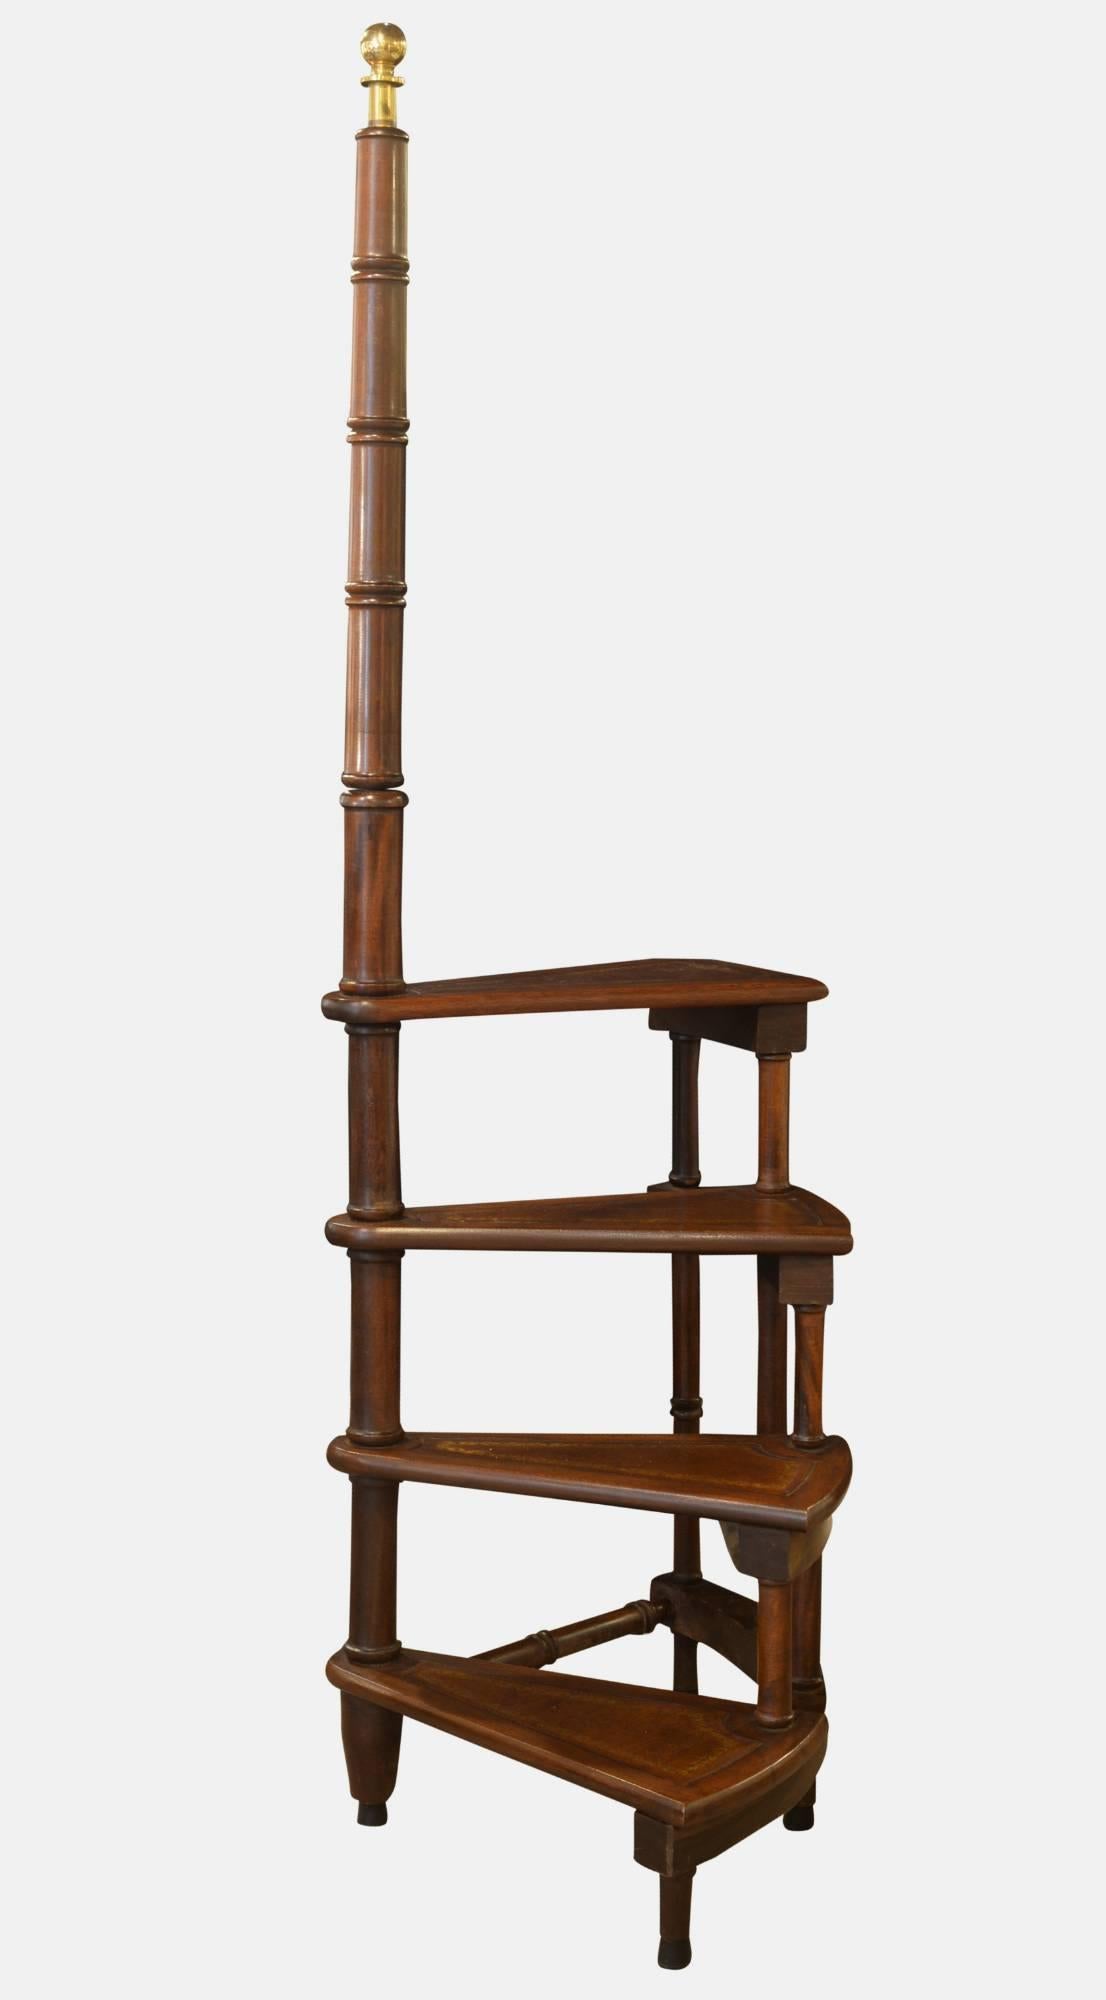 Mid-20th century set of library steps in a Regency style.

Measures: Height of top step 80cm.
  